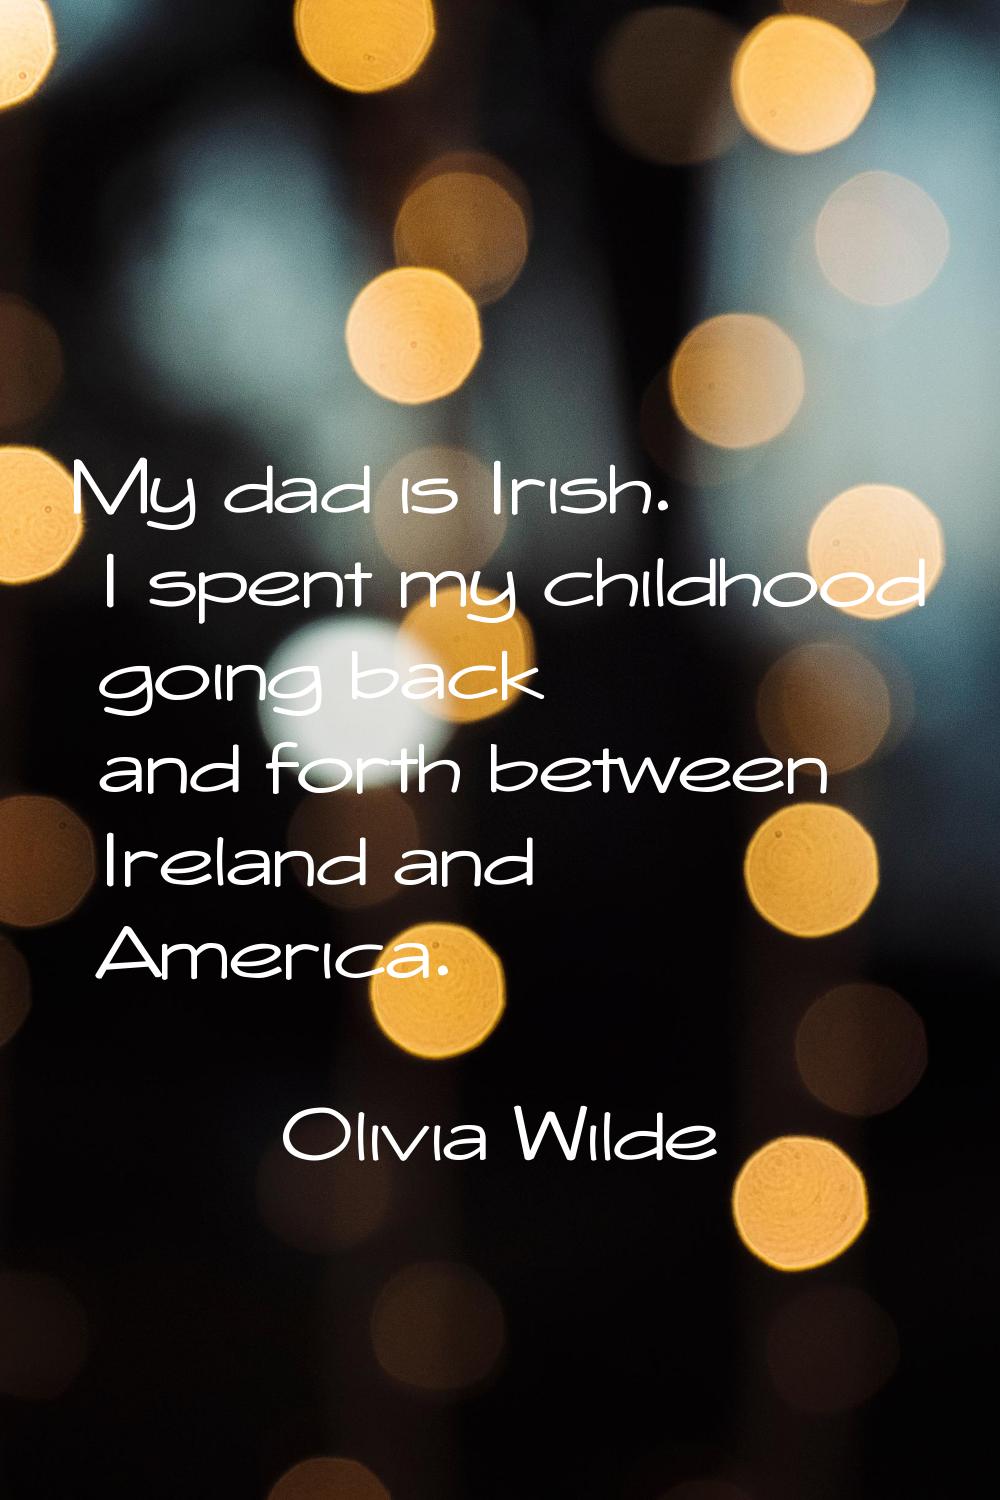 My dad is Irish. I spent my childhood going back and forth between Ireland and America.